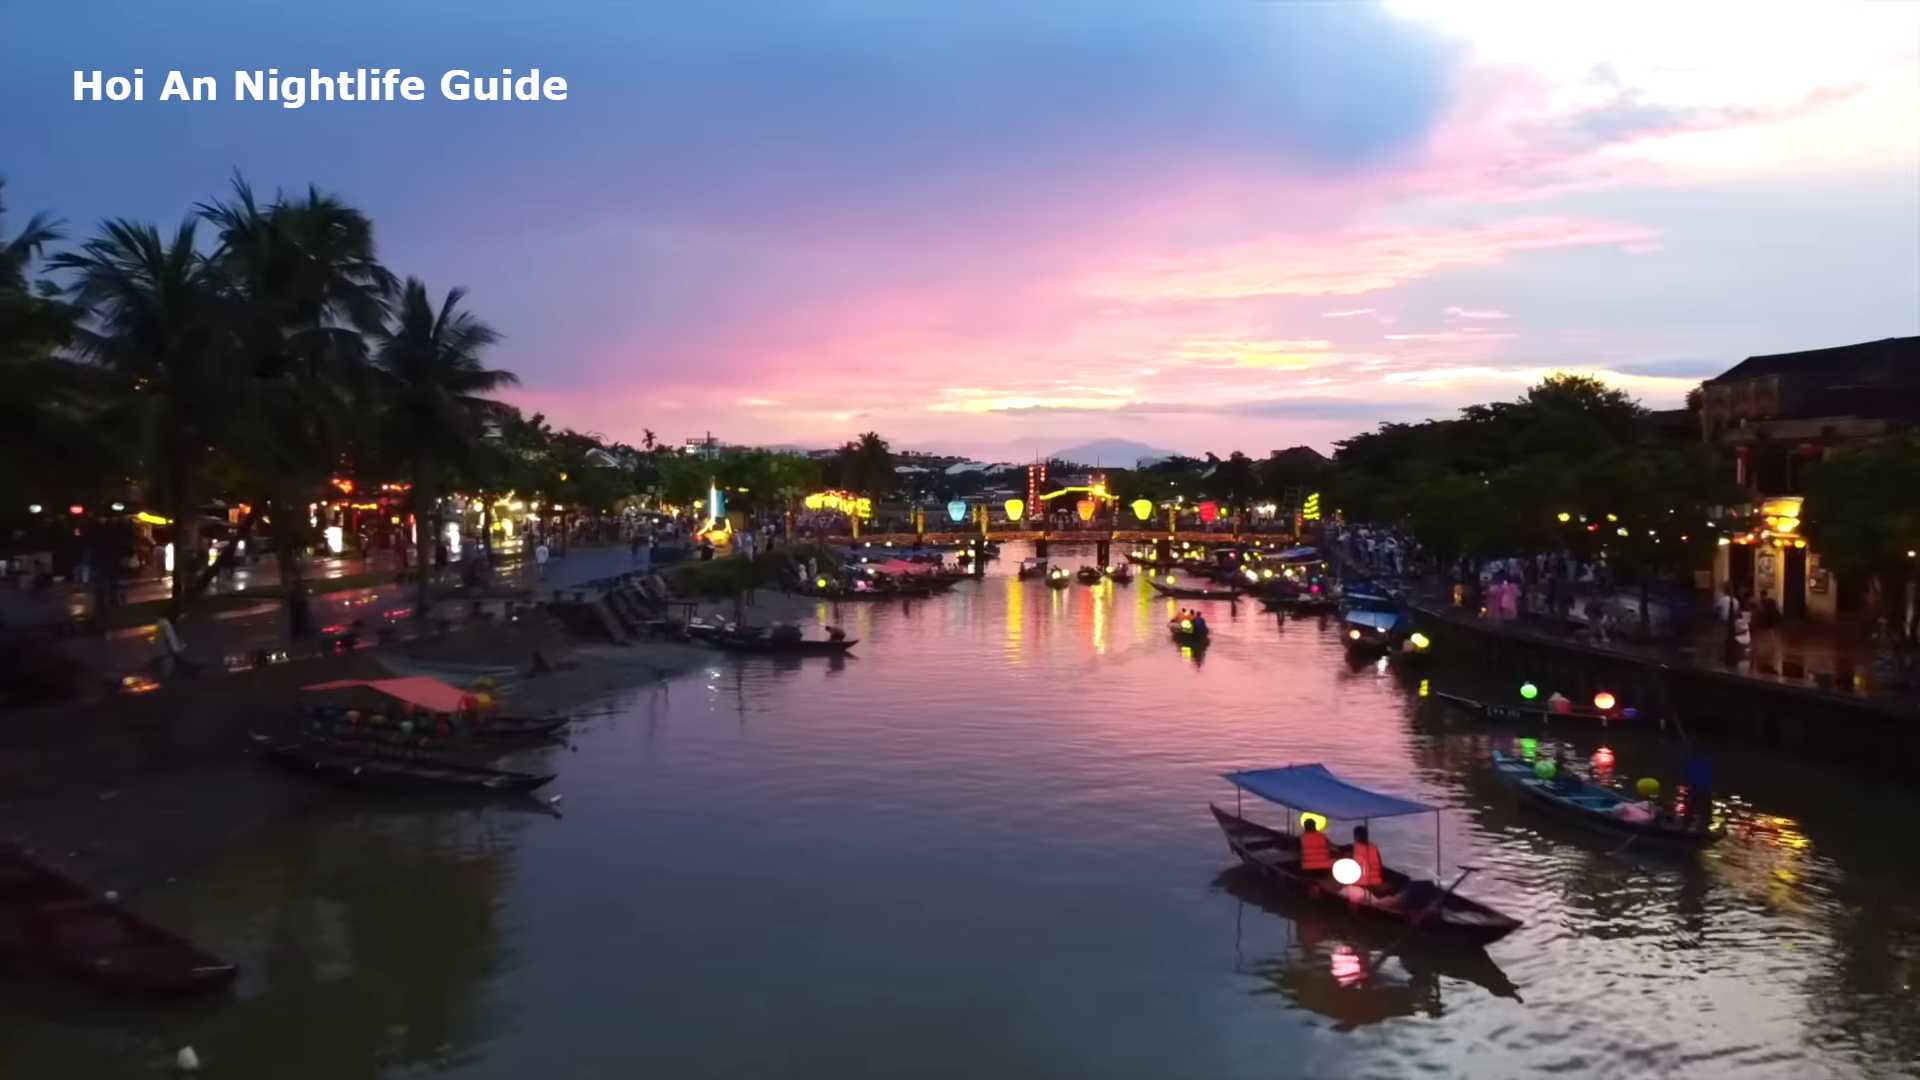 Hoi An Nightlife Guide